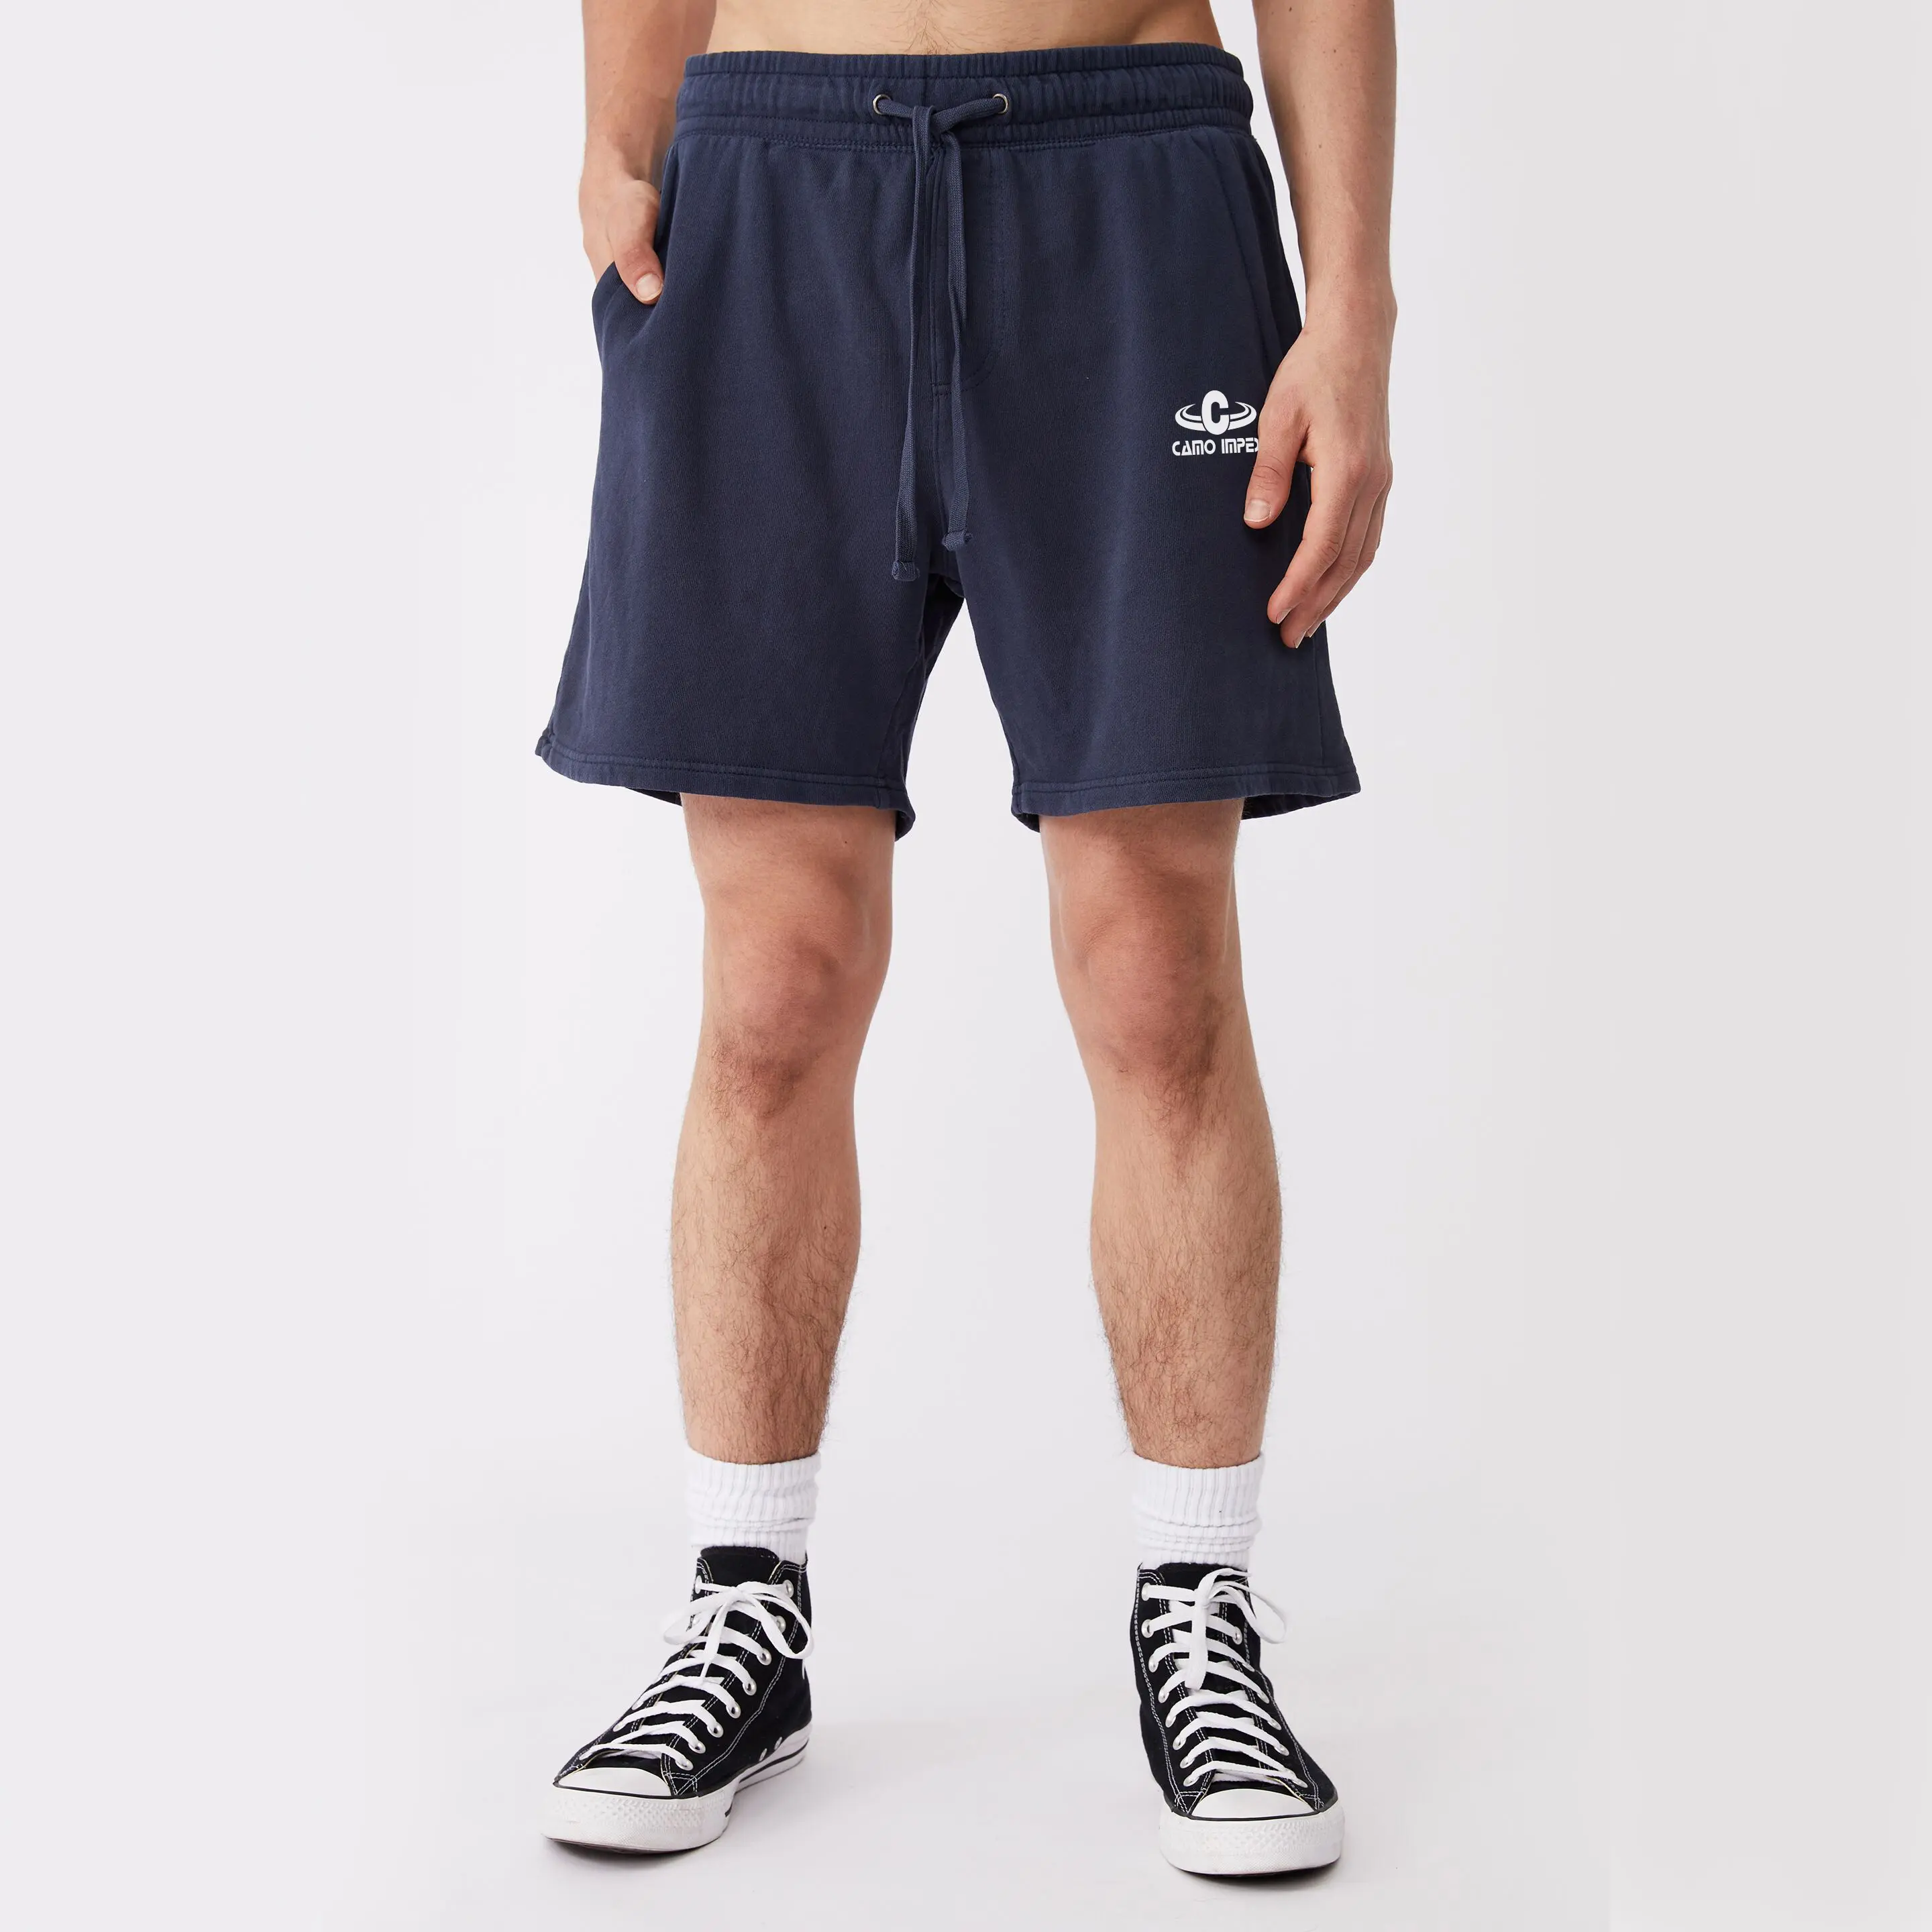 Mens Cargo Shorts sale clearance